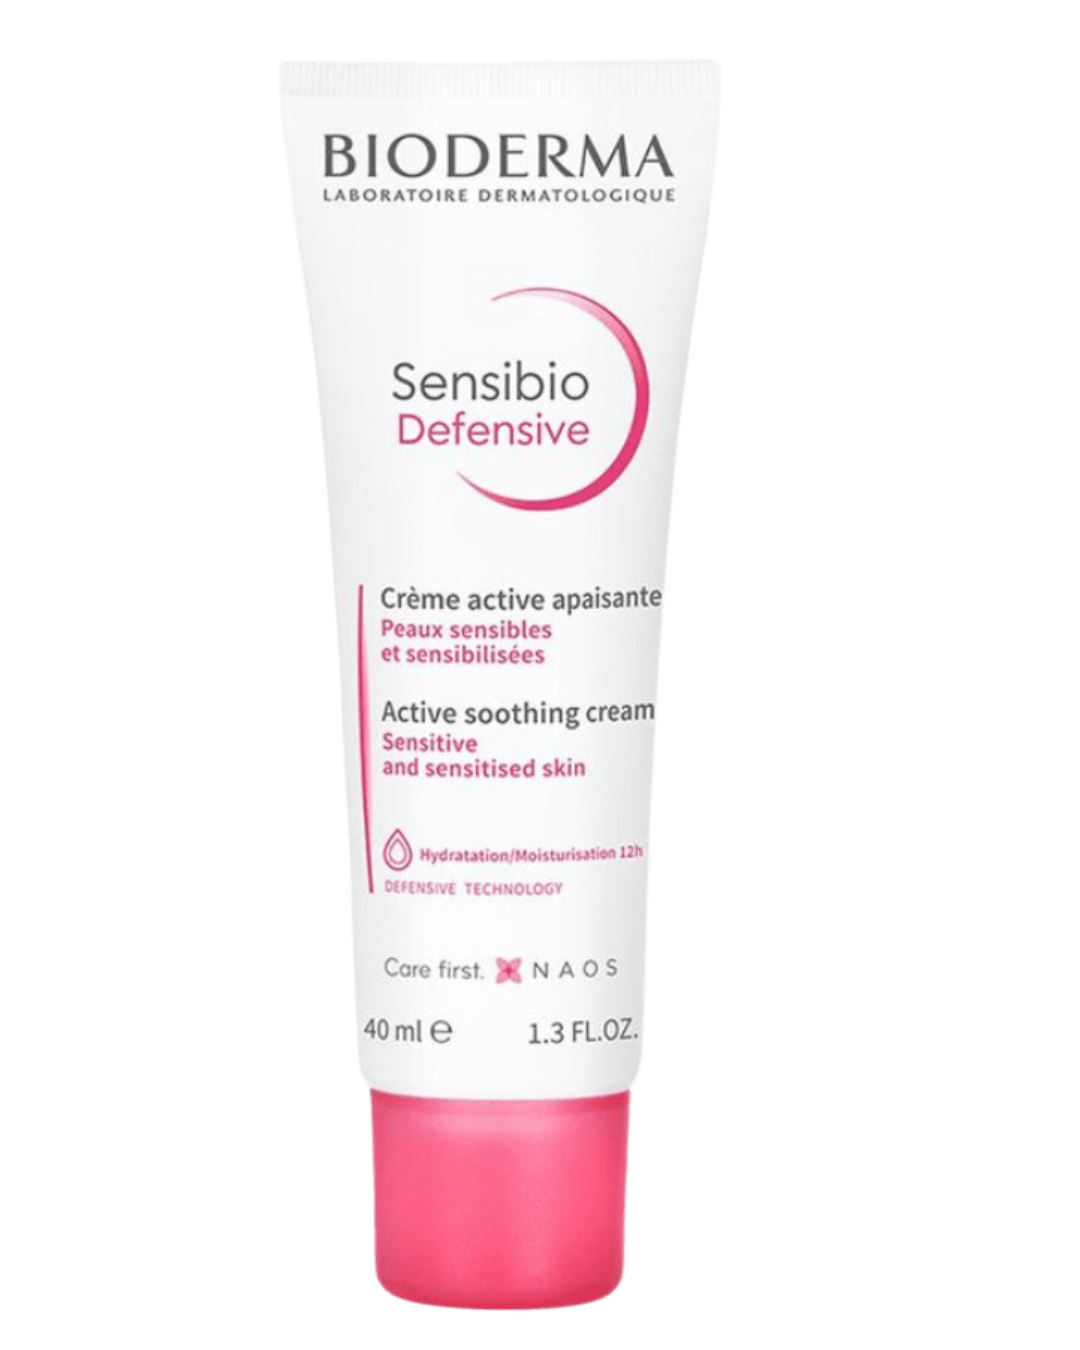 Daily Vanity Beauty Awards 2024 Best Skincare Bioderma Sensitive Skin Soothing &#038; Hydrating Facial Moisturiser Voted By Beauty Experts